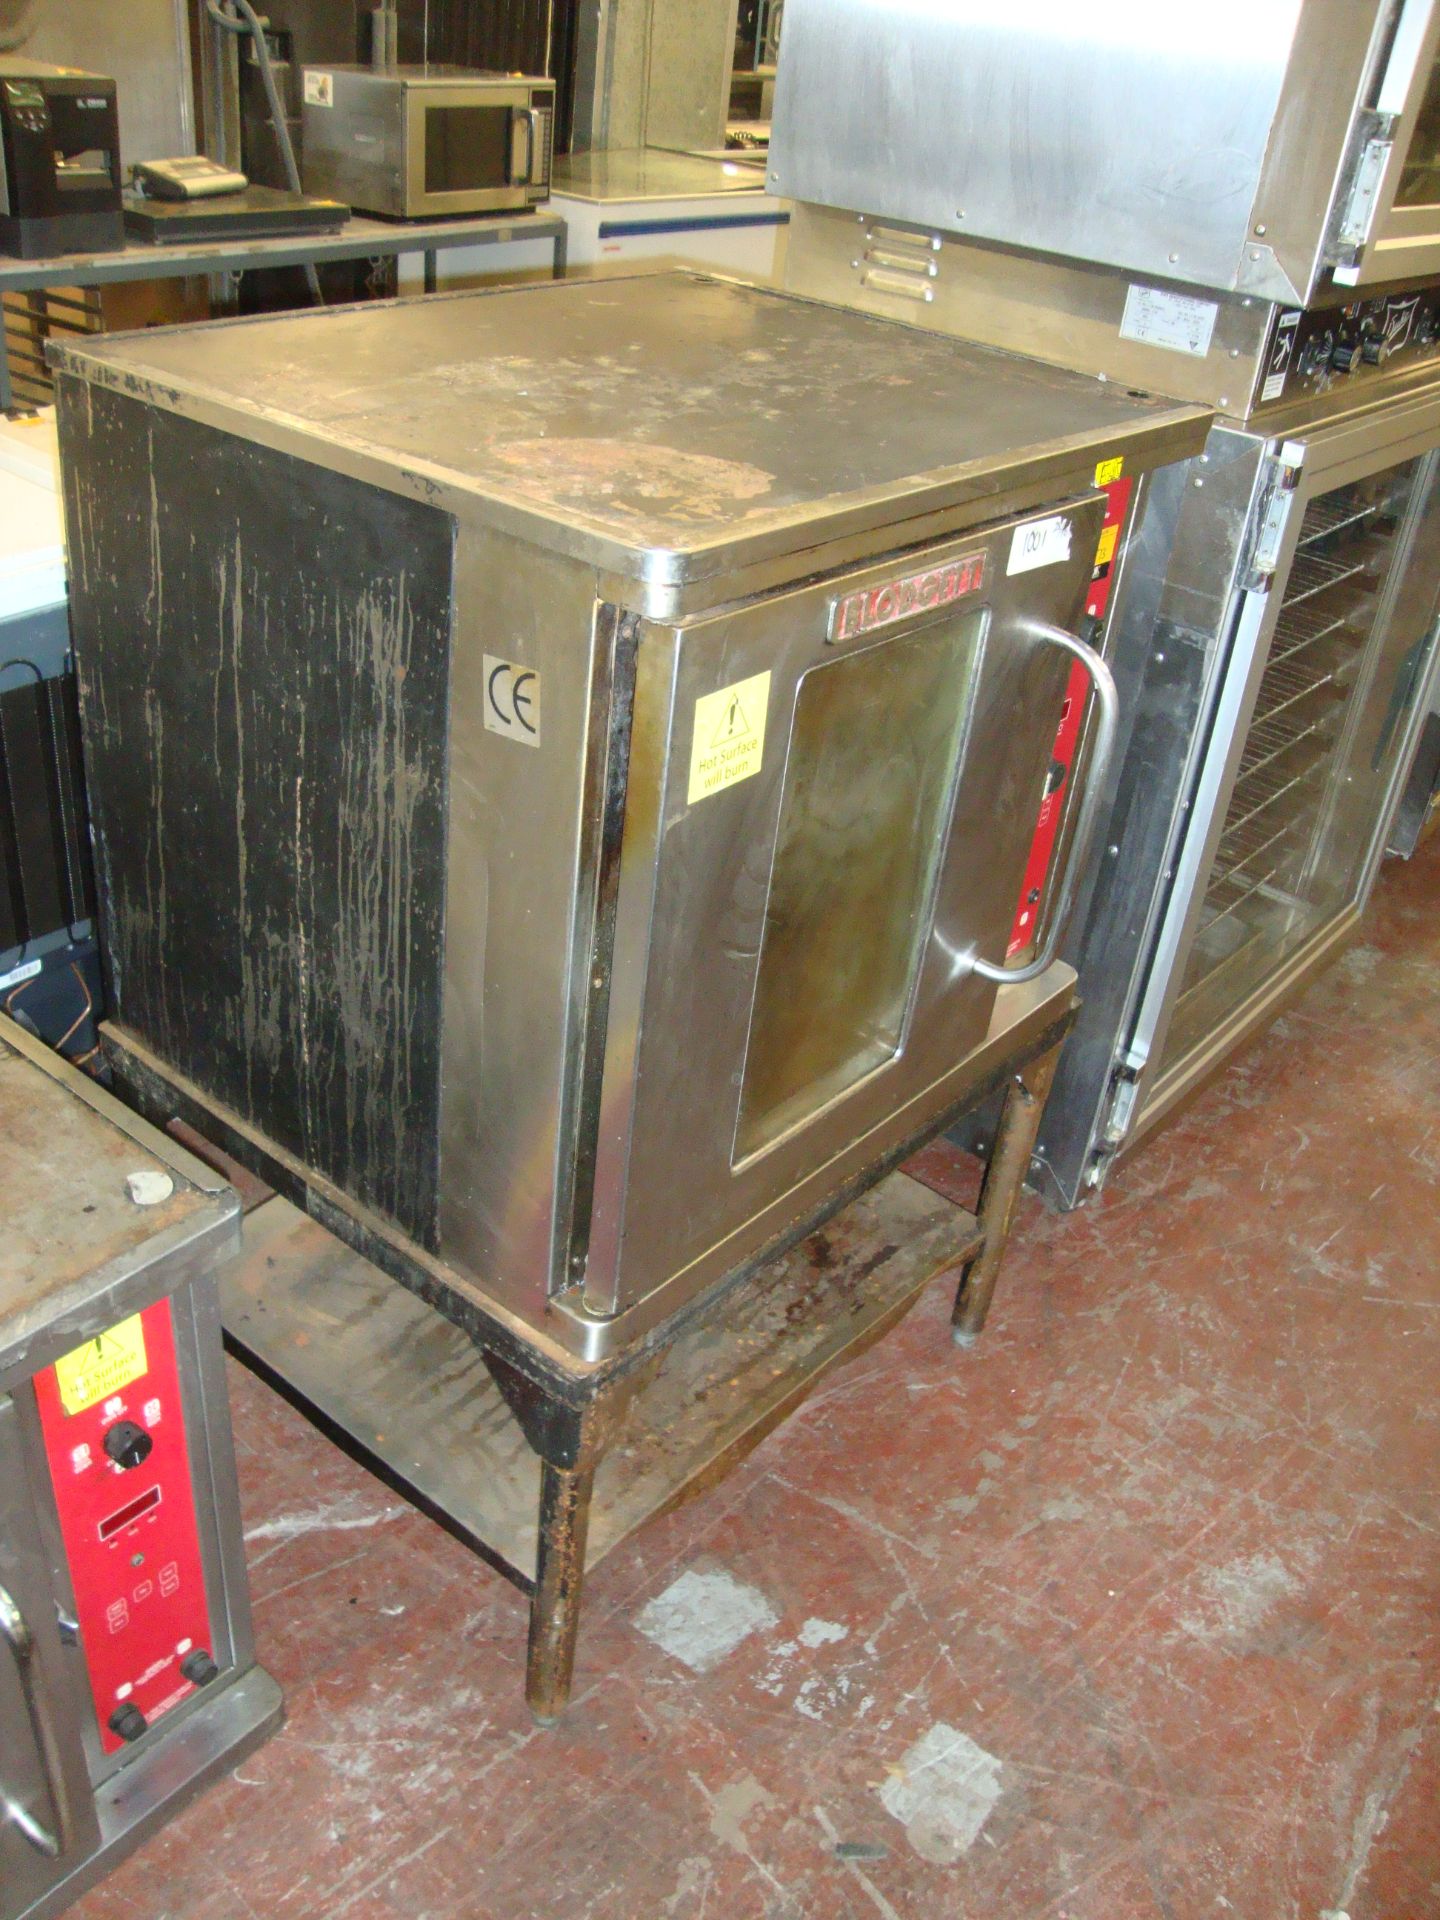 Blodgett oven on metal stand